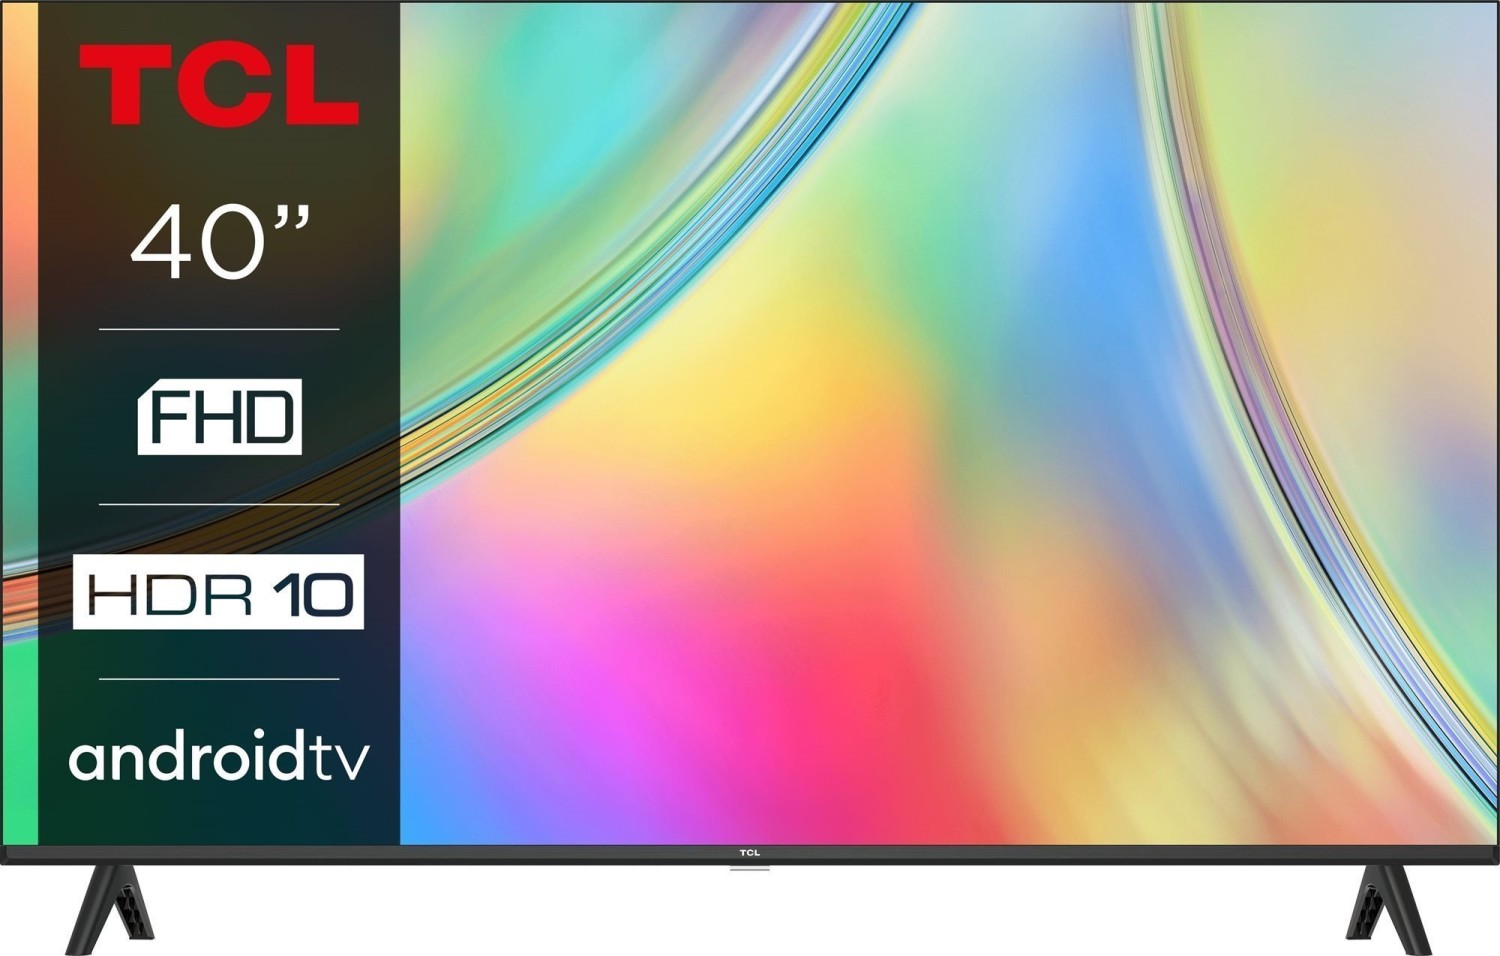 TV TCL 40S5400A 40" LED 1080p FHD HDR Android